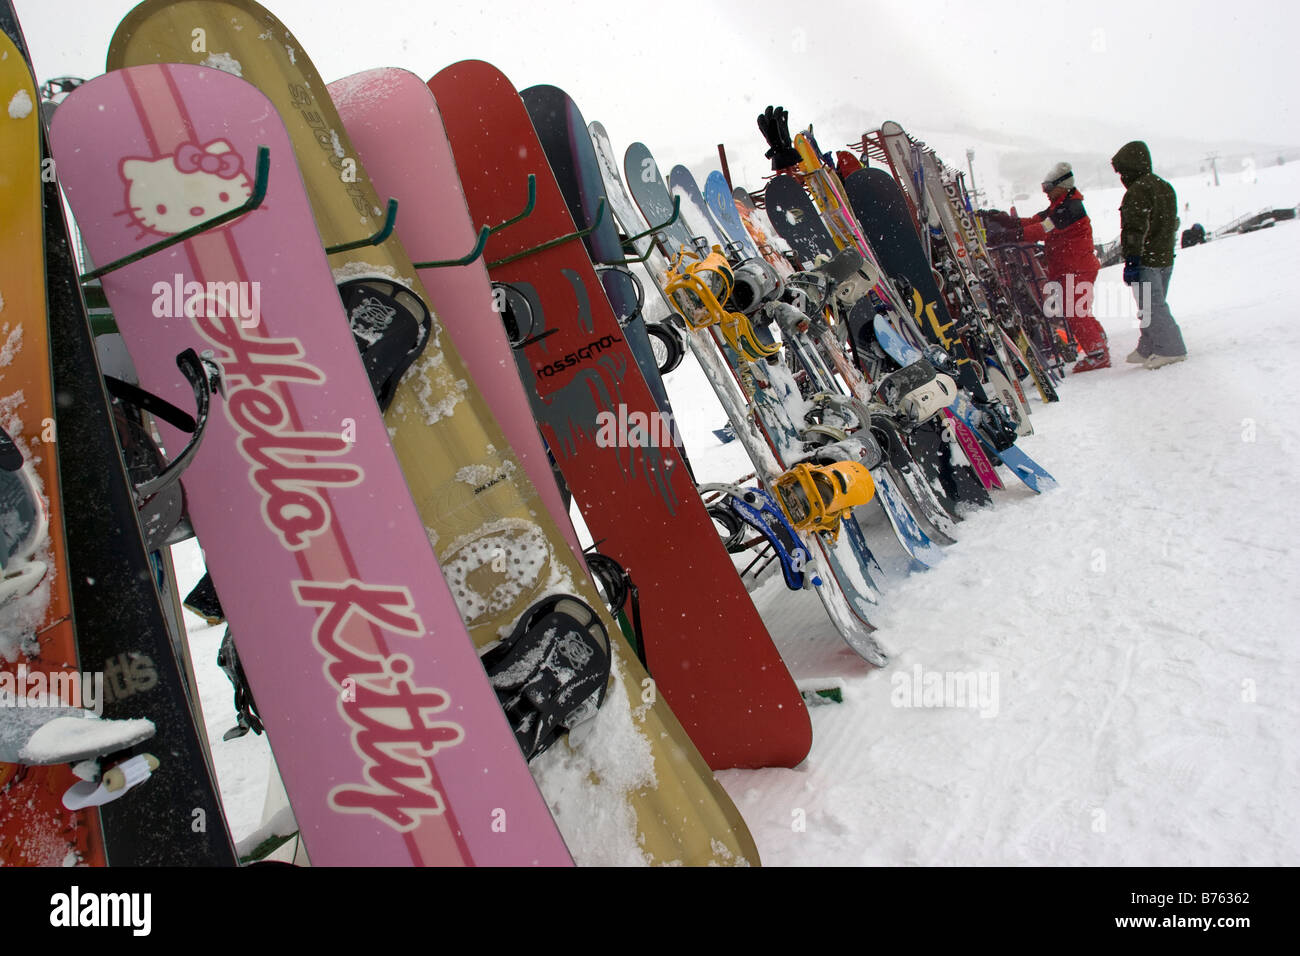 Snowboards lined up at the bottom of the run in Niseko, Japan Stock Photo -  Alamy